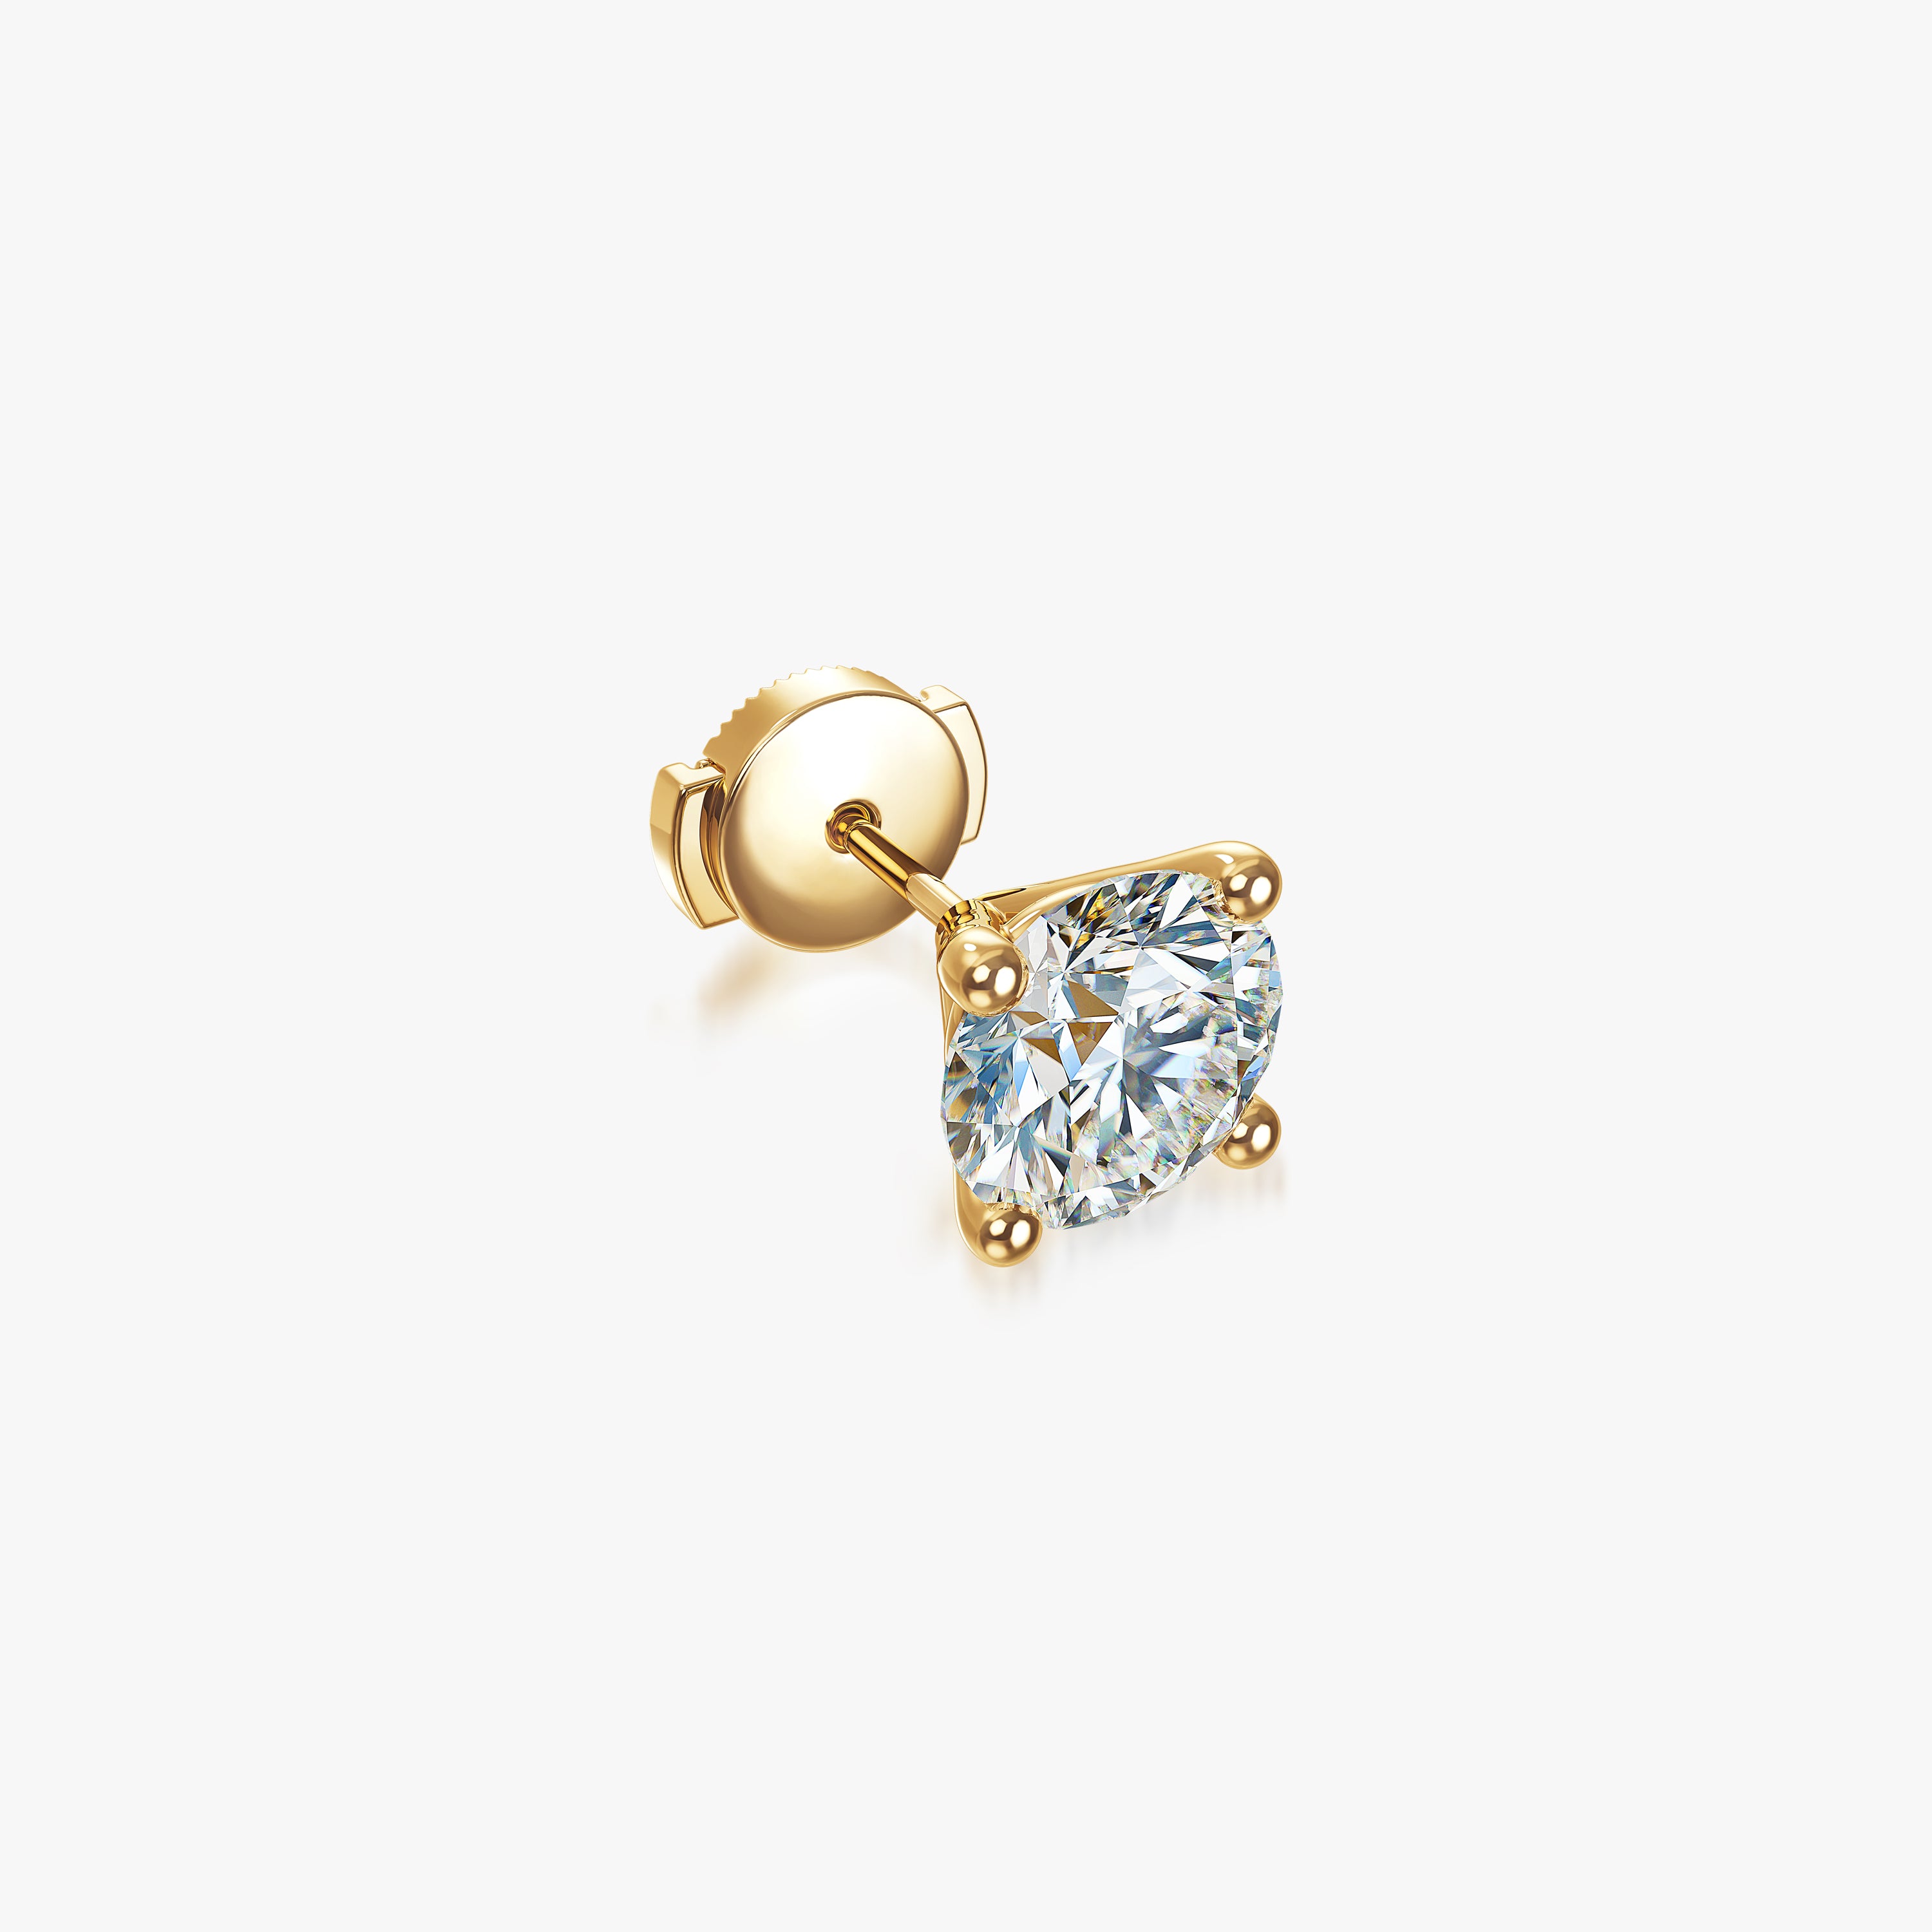 18kt yellow gold and diamond stud earrings